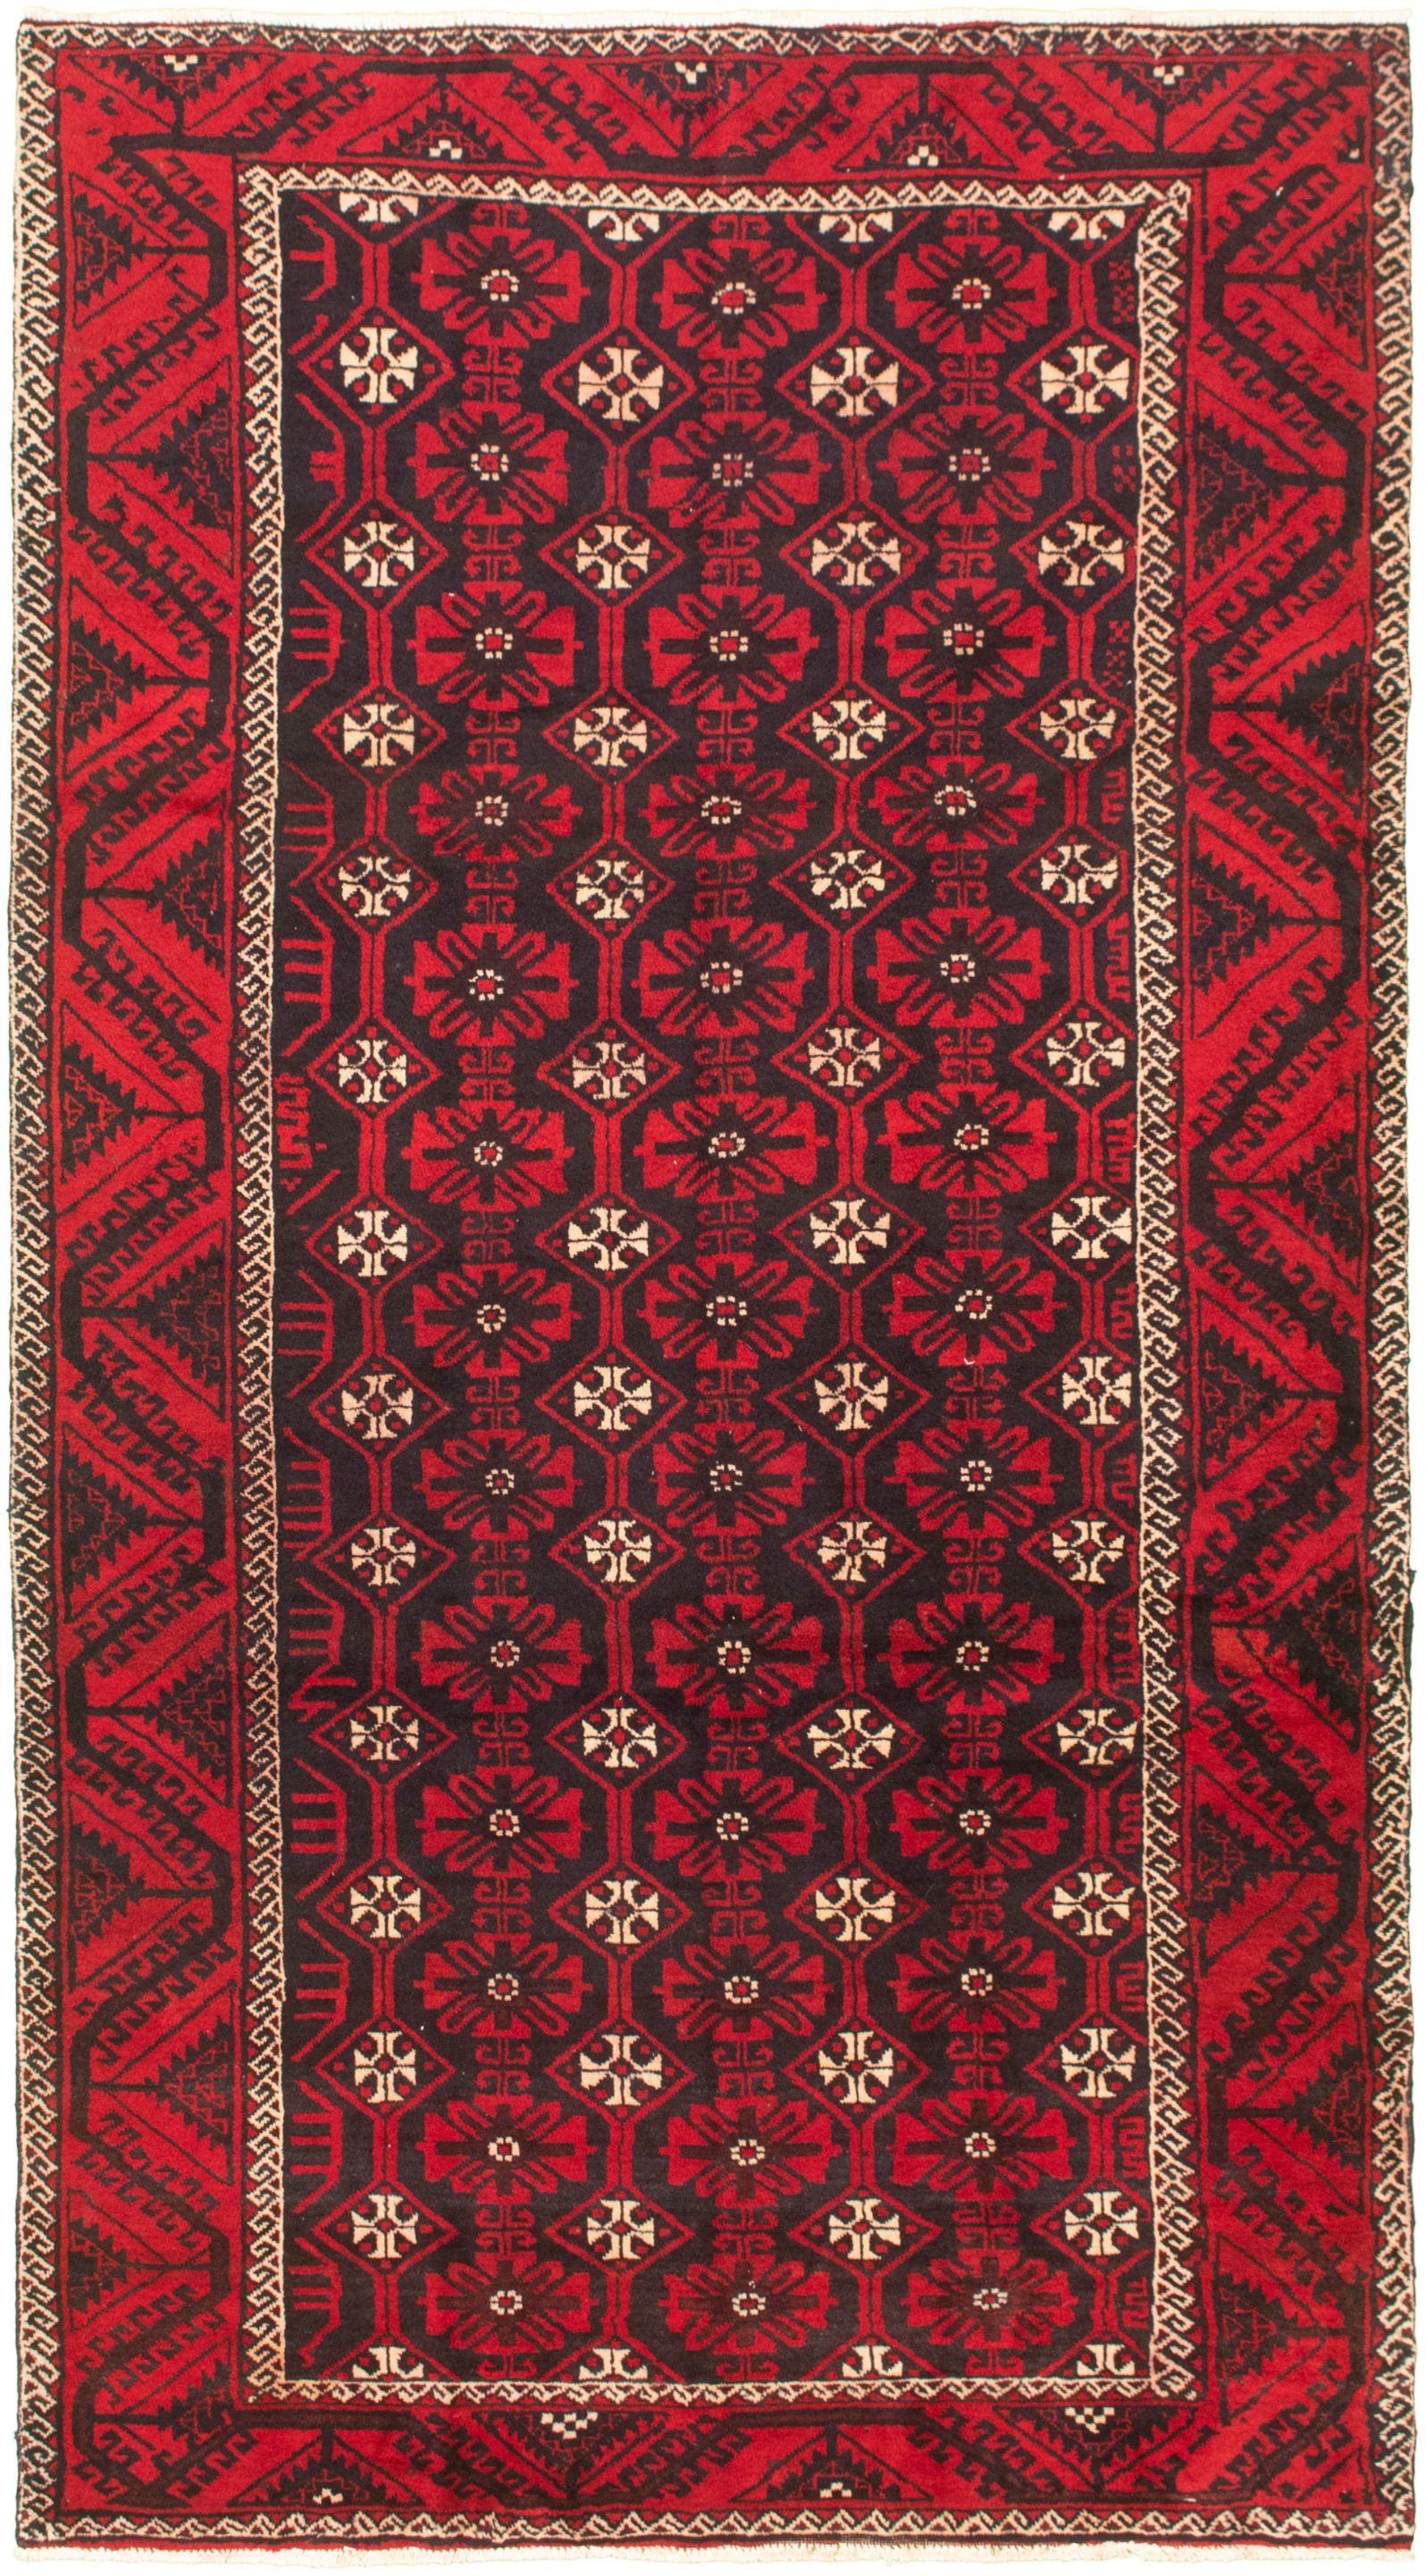 Hand-knotted Authentic Turkish Red Wool Rug 5'1" x 9'10"  Size: 5'1" x 9'10"  